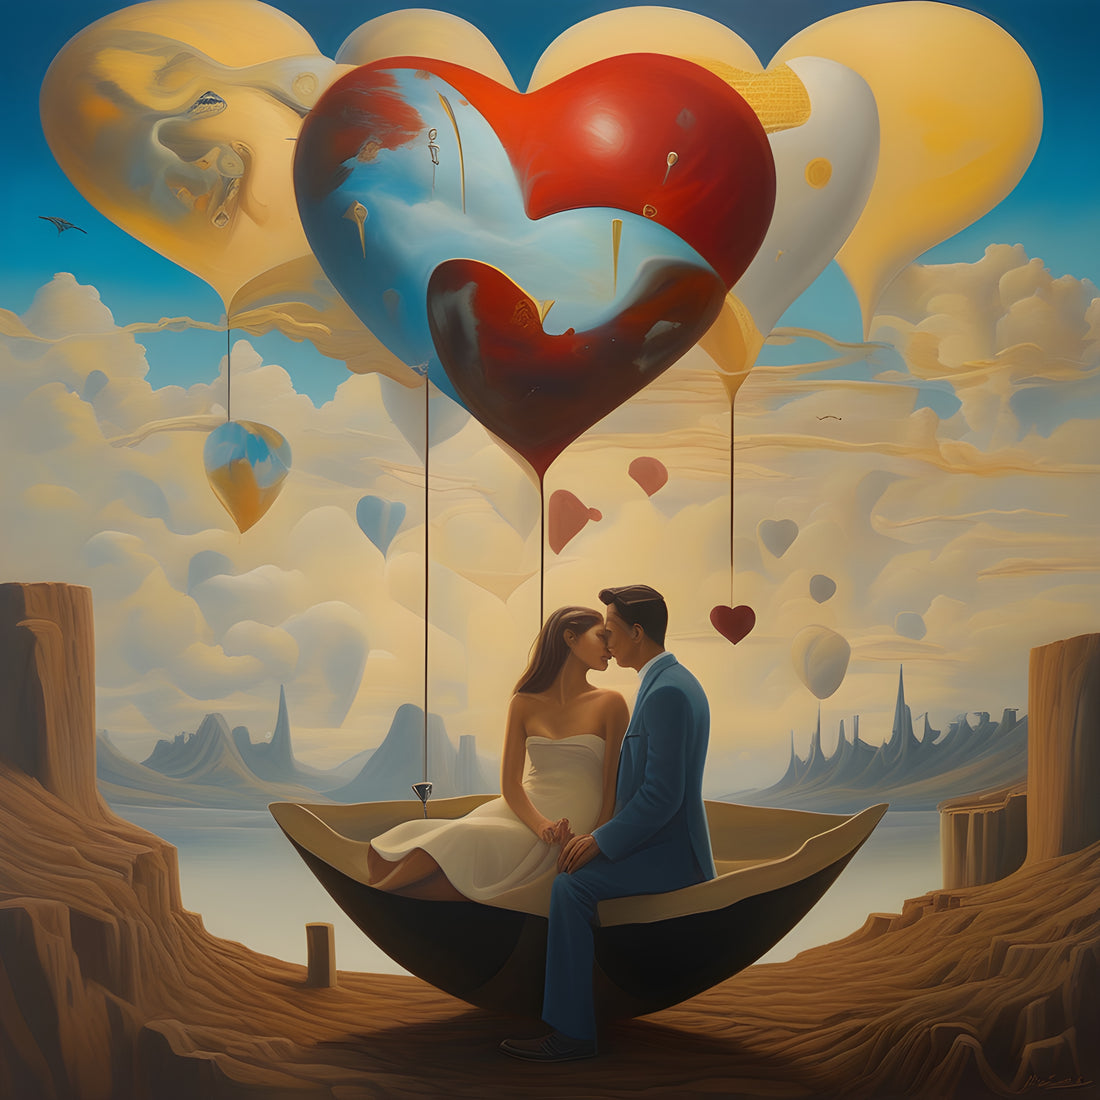 Surreal painting of a couple embracing in a kiss, seated in a half-shell boat floating under a sky filled with heart-shaped balloons, evoking a romantic and dreamlike atmosphere.